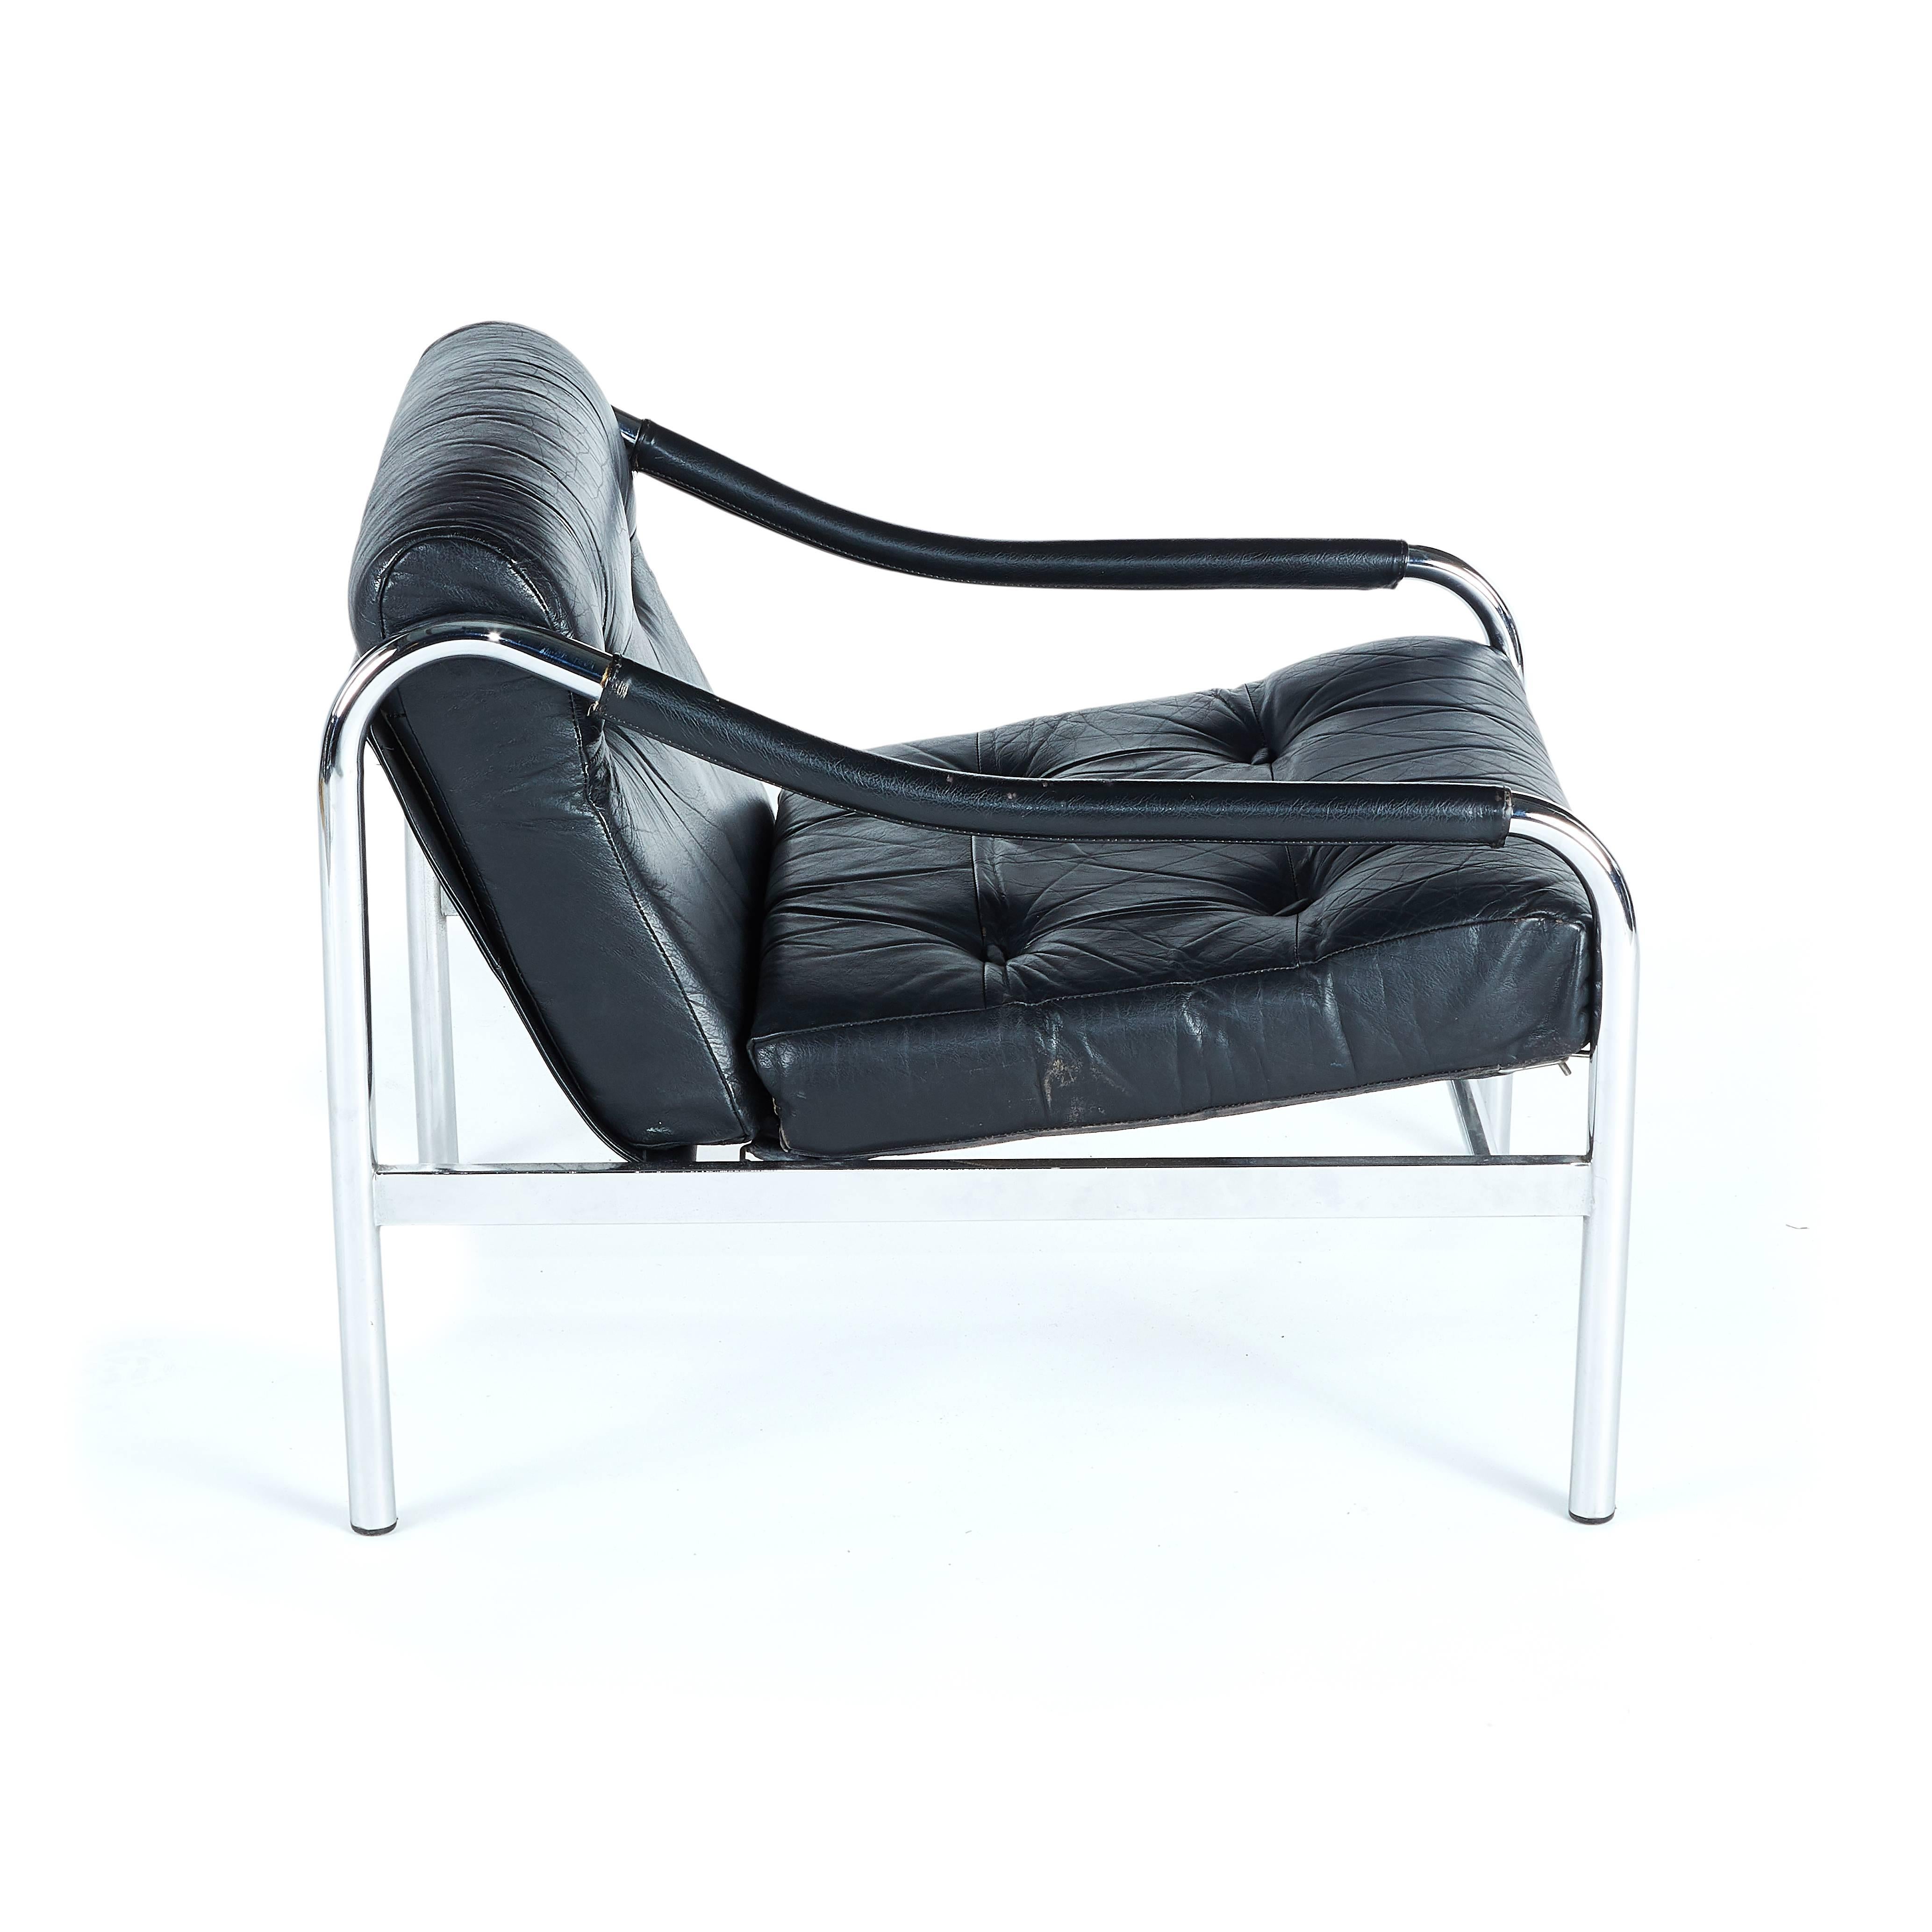 Mid-Century Modern Mid-1970s Black Leather and Chrome Suite of Kadia Seat Furniture by Pieff